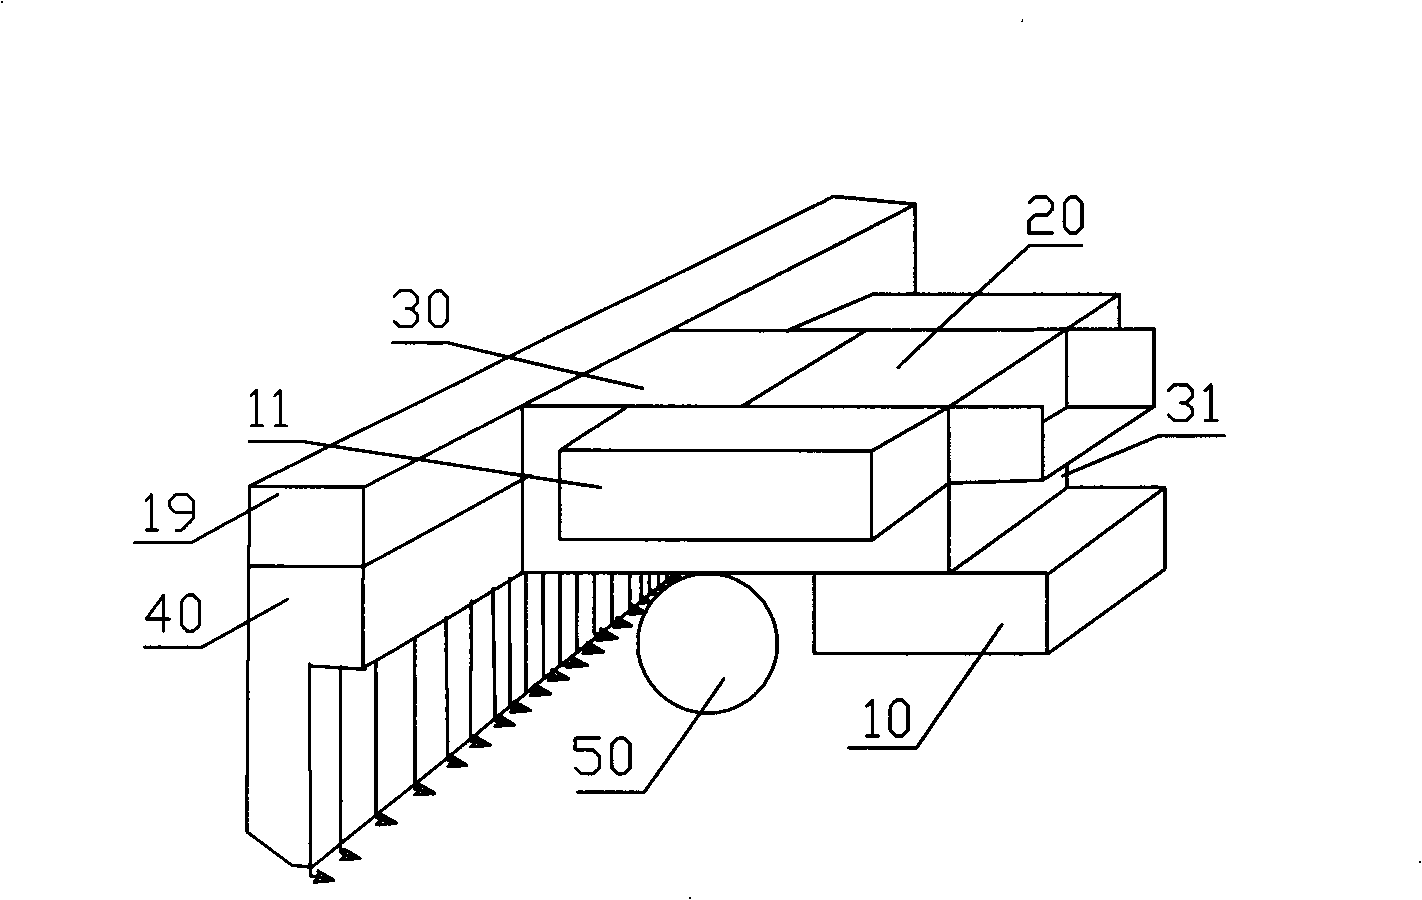 Full-automatic accurate garlic transplanter and planting method